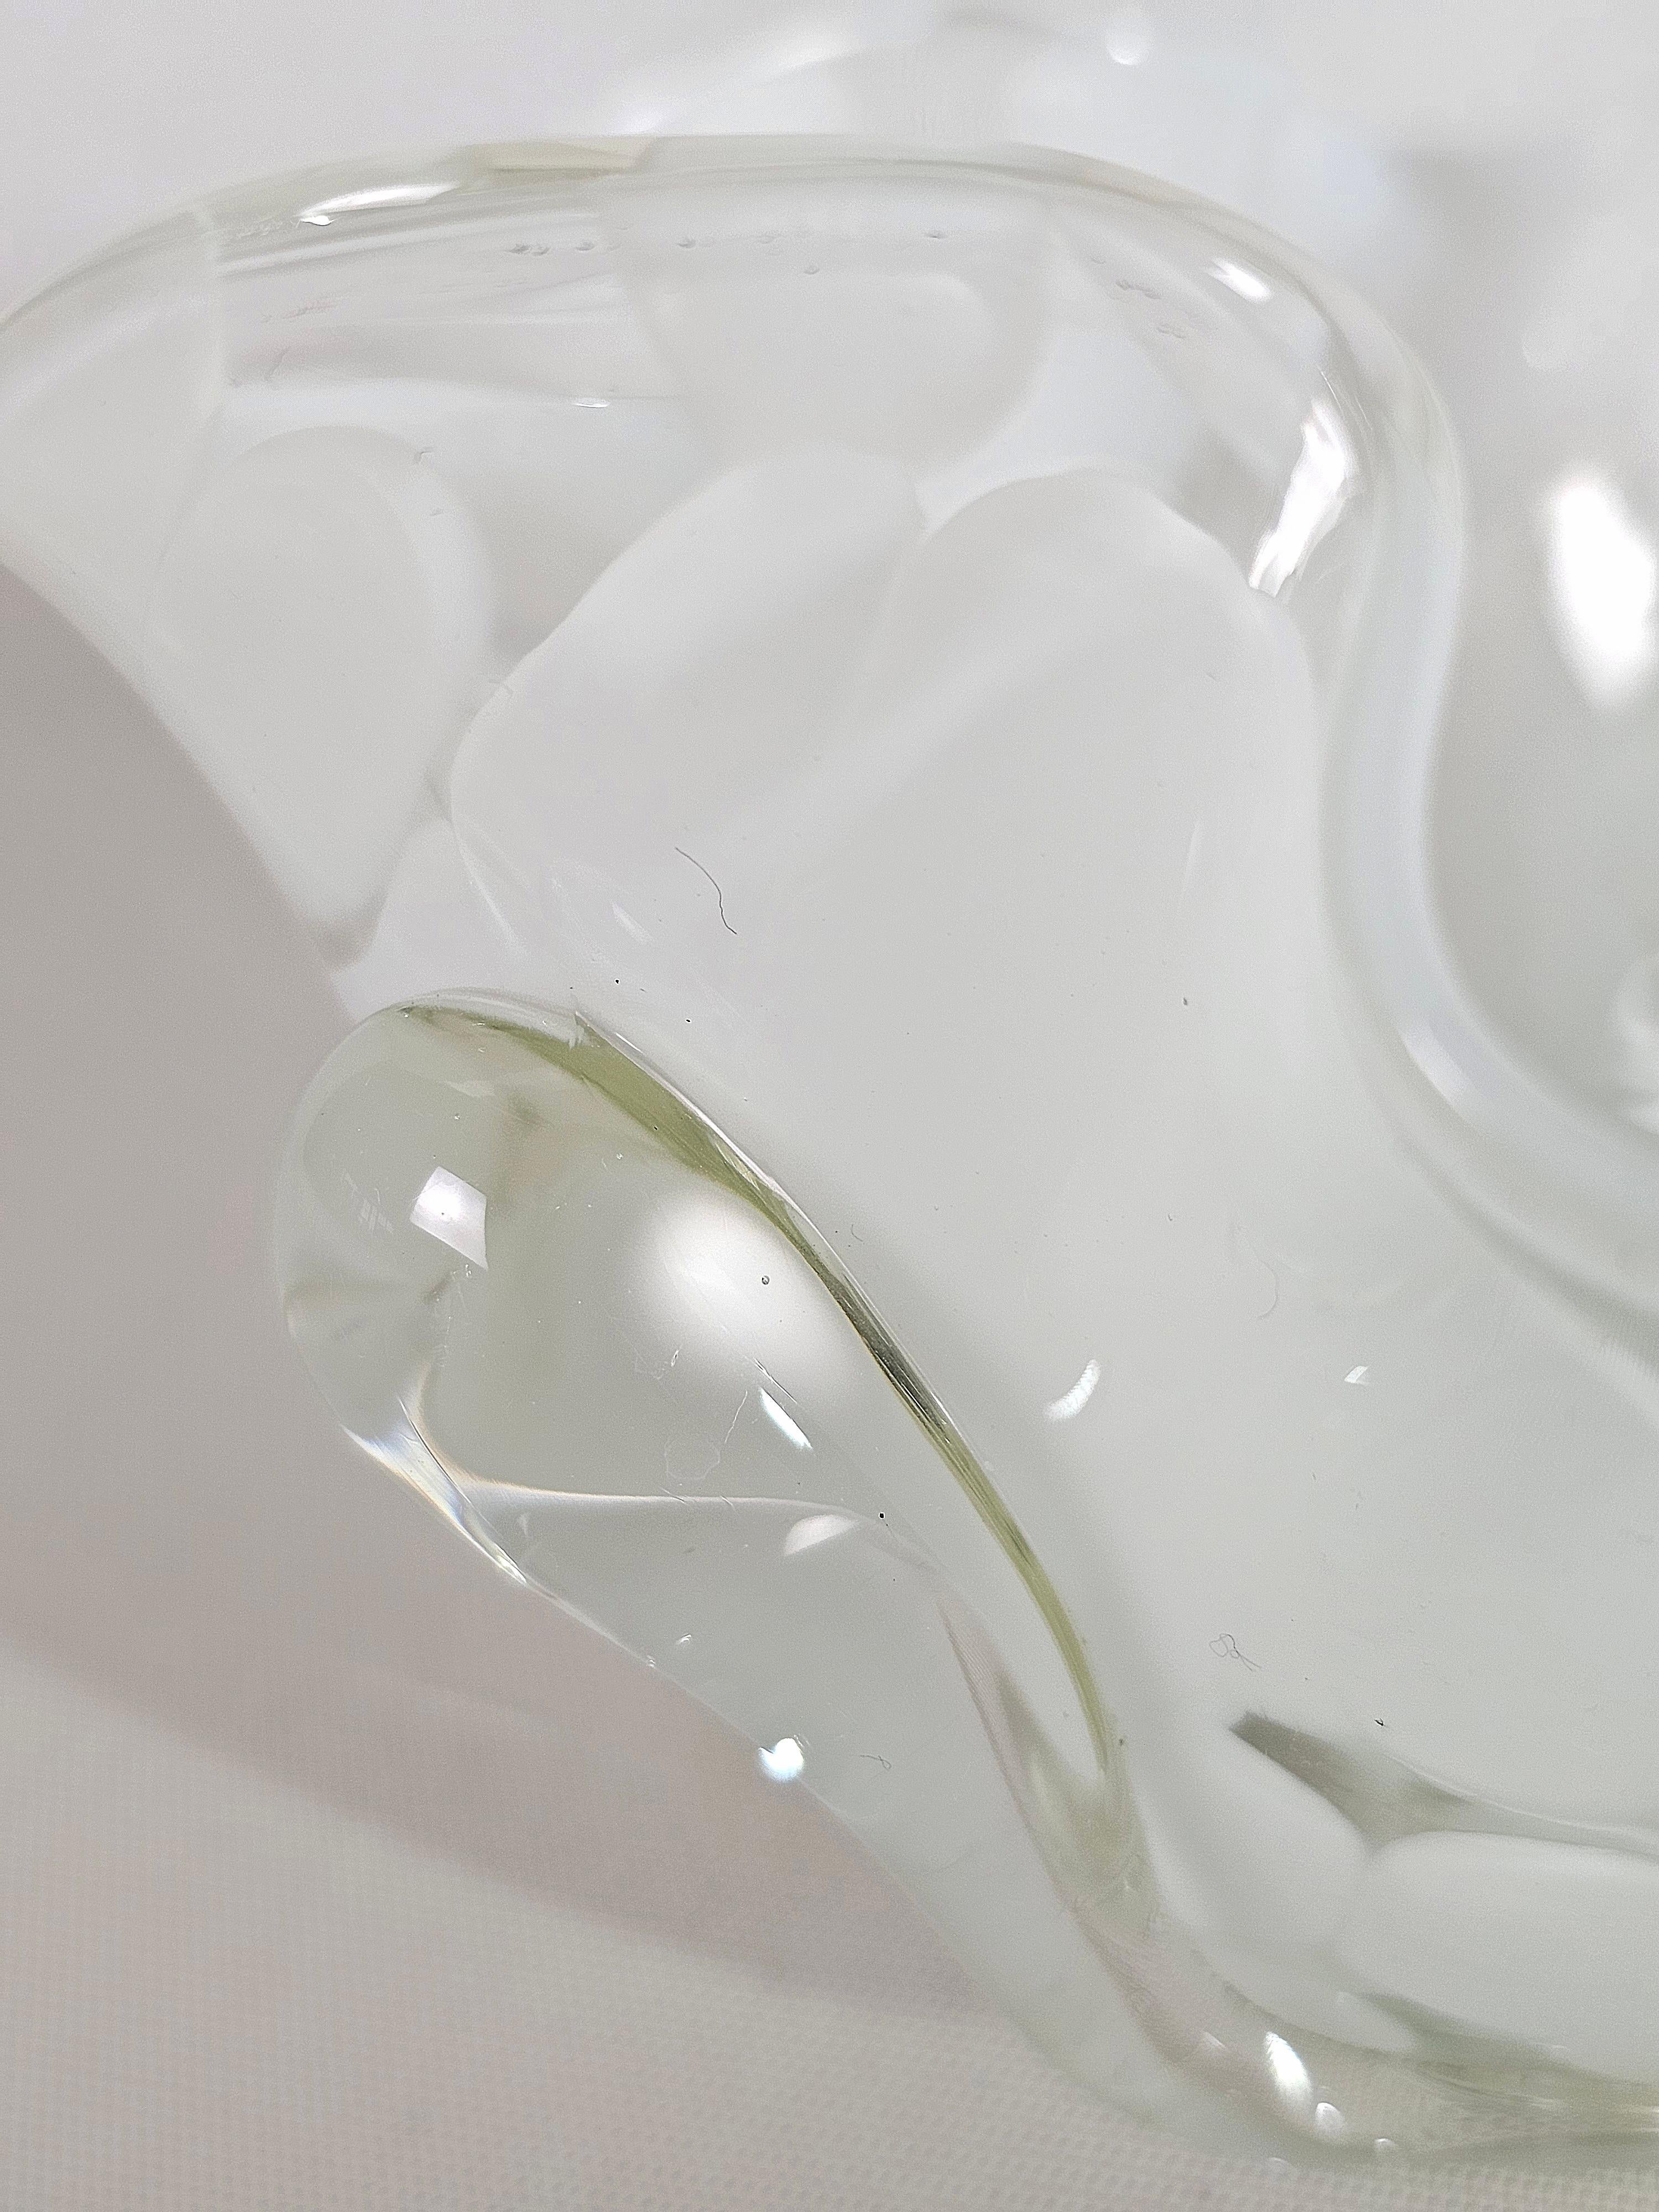 Graceful handkerchief-shaped vase in transparent and white Murano glass, attributed to Barovier&Toso. Italian production from the 70s.

Weight: 470 grams

Note: We try to offer our customers an excellent service even in shipments all over the world,